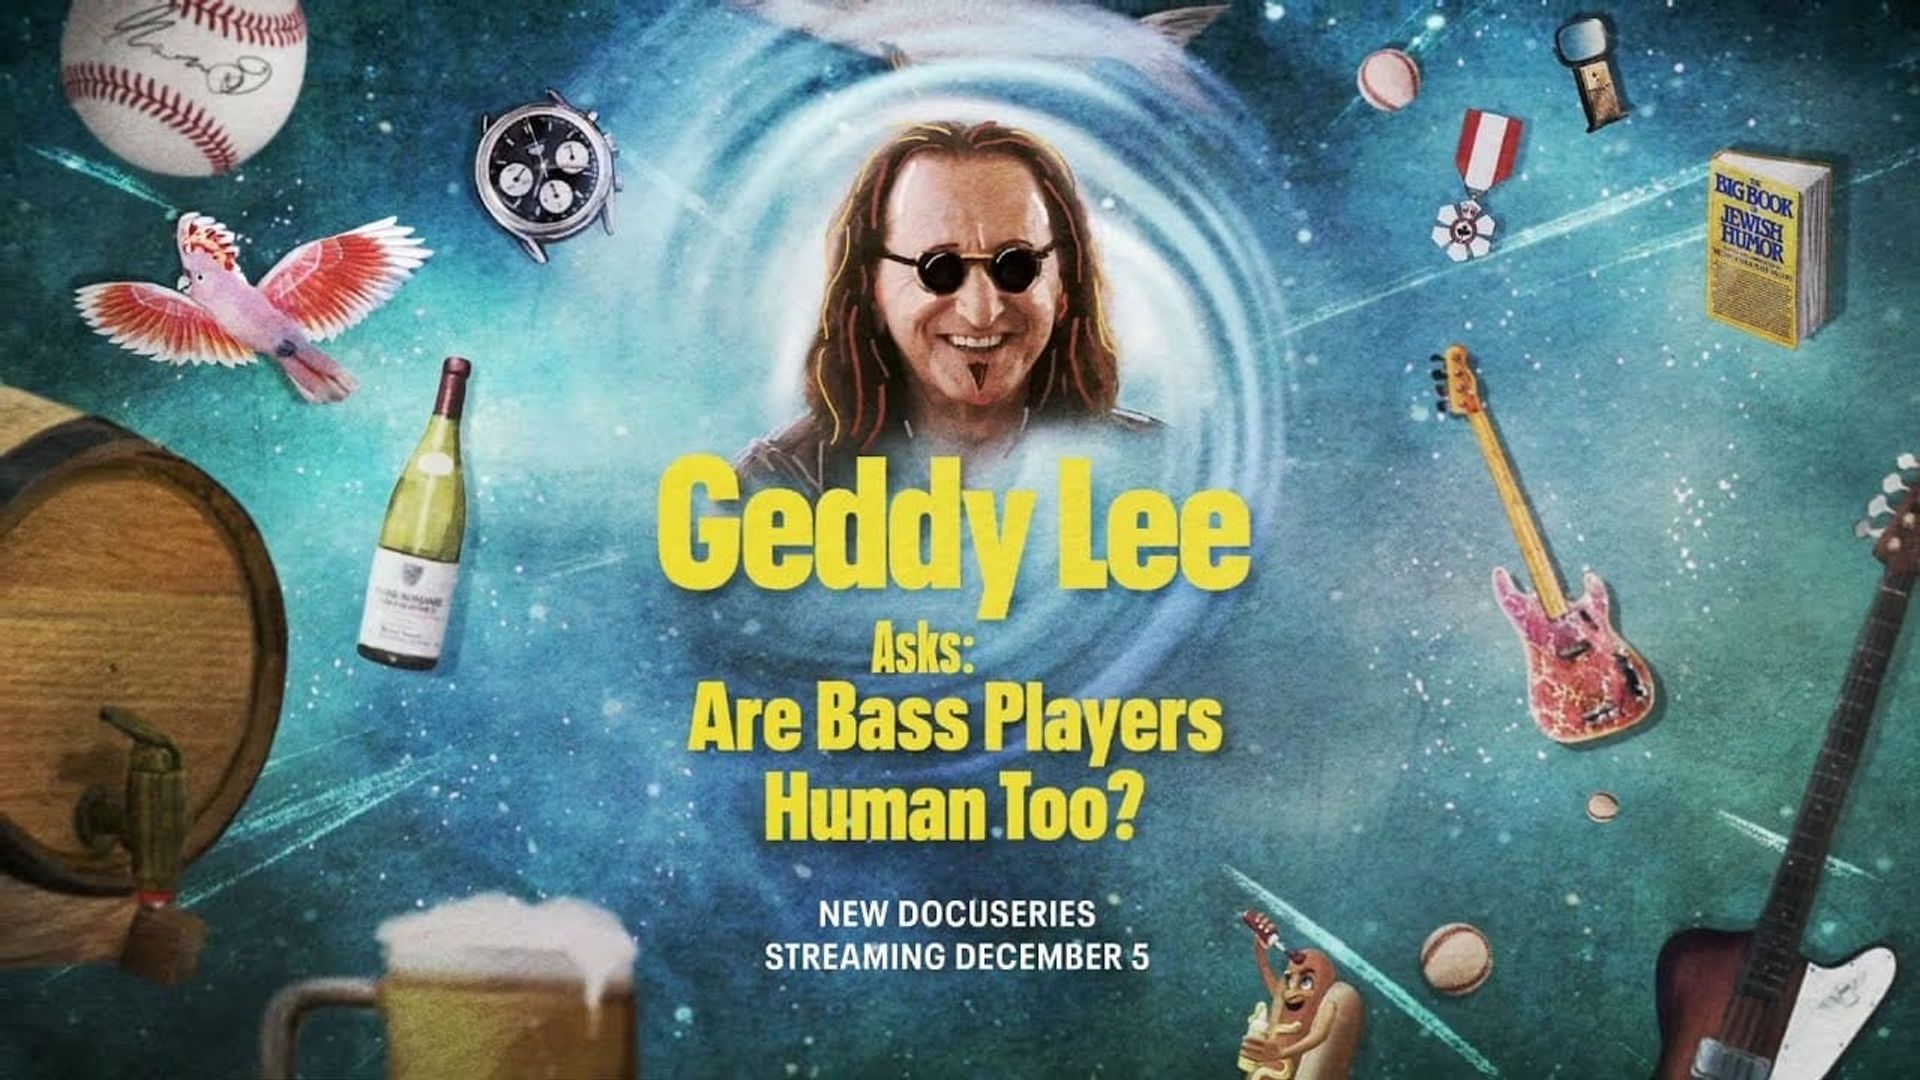 Geddy Lee Asks: Are Bass Players Human Too? background